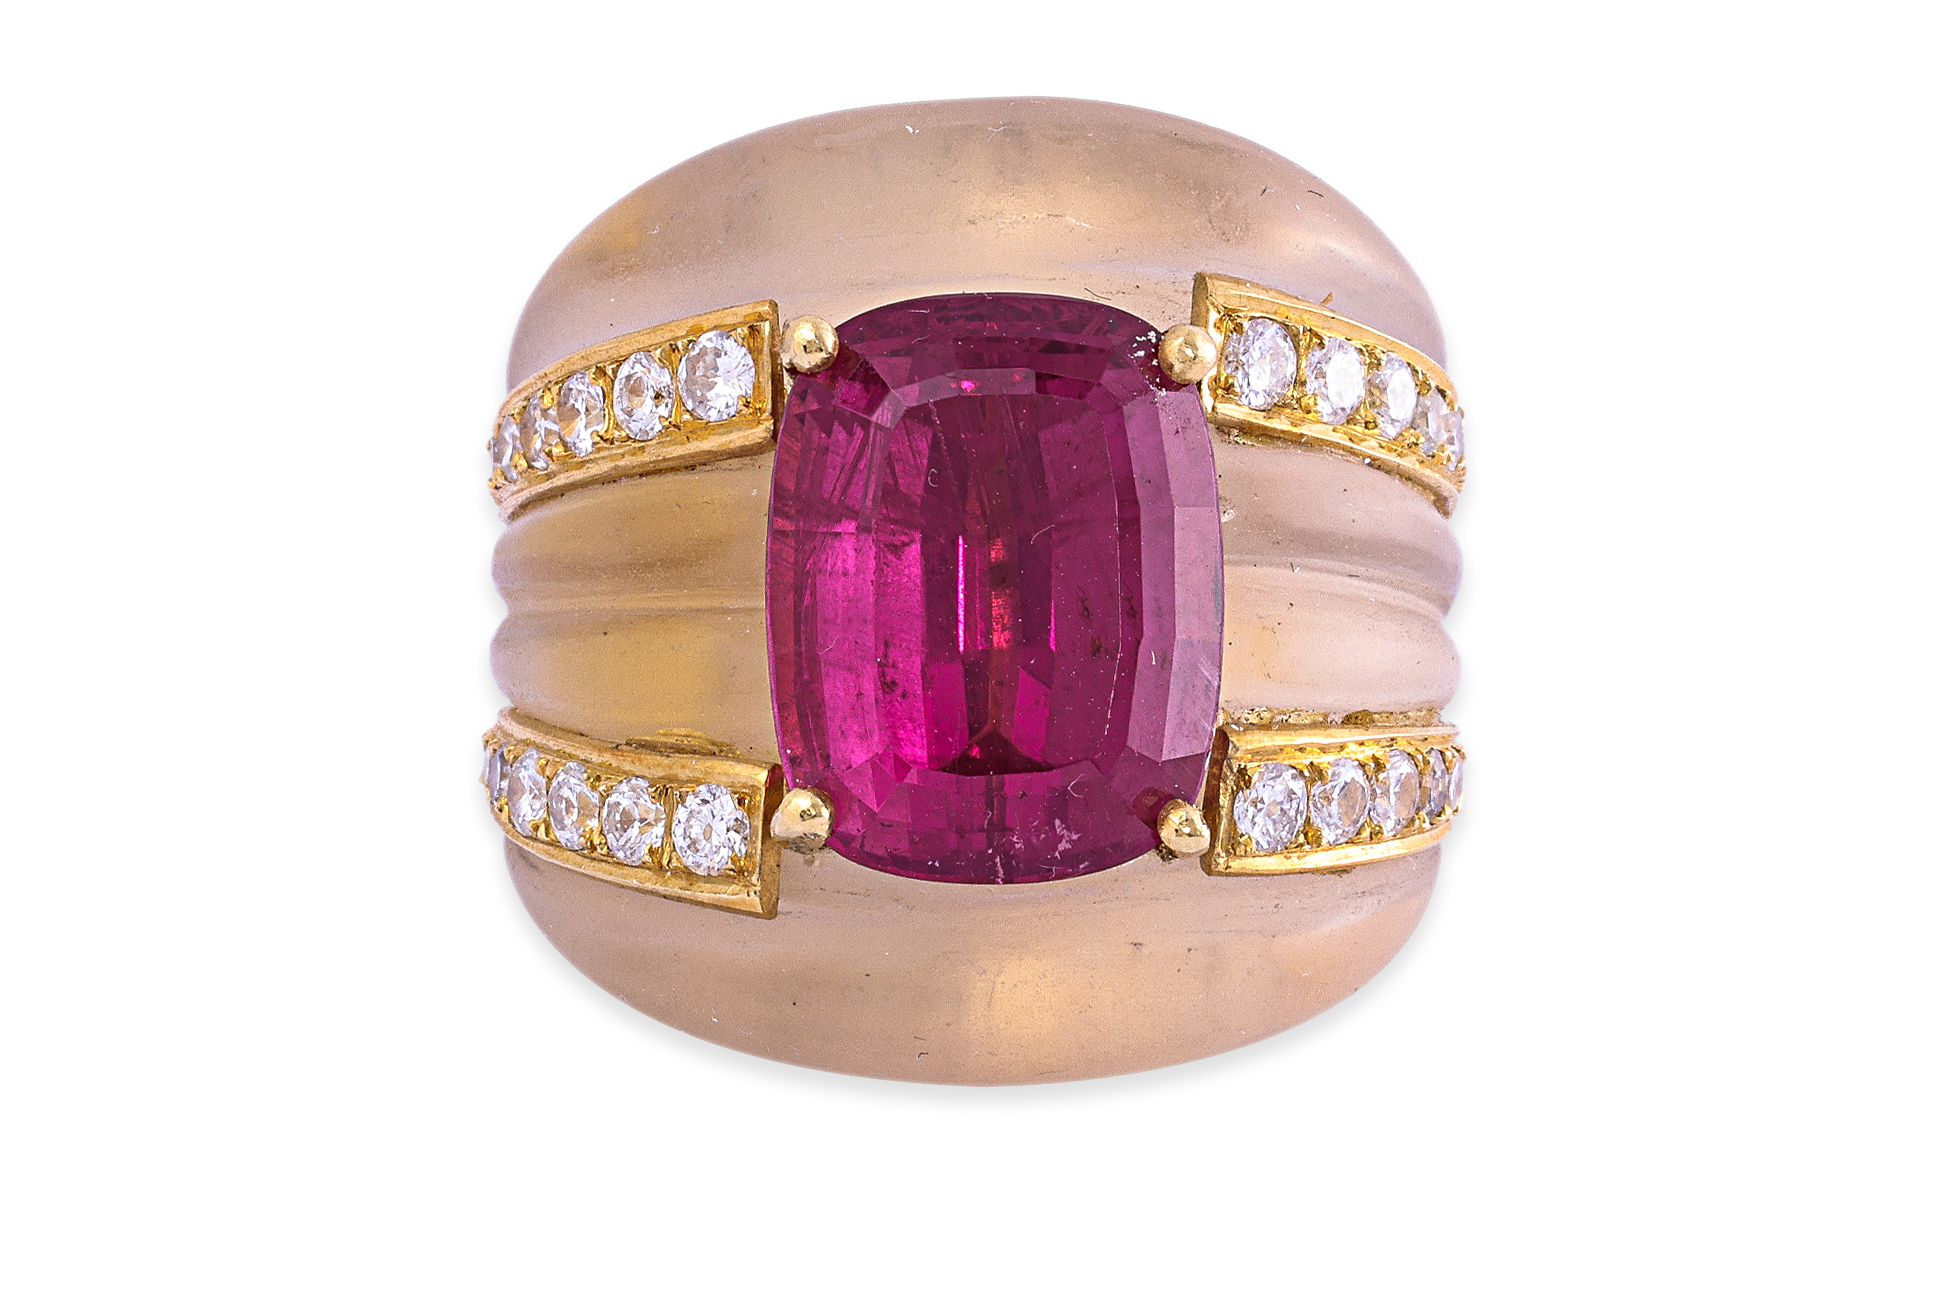 A RUBELLITE TOURMALINE AND DIAMOND RING - Image 2 of 4